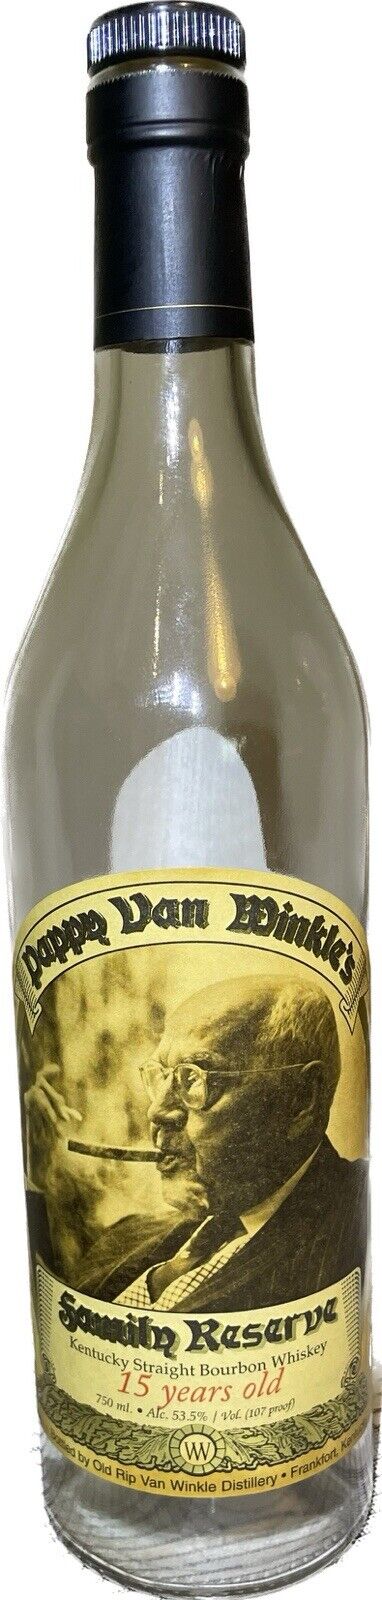 Pappy Van Winkle 15 Year Old Family Reserve Empty Bottle Unrinsed Collectible